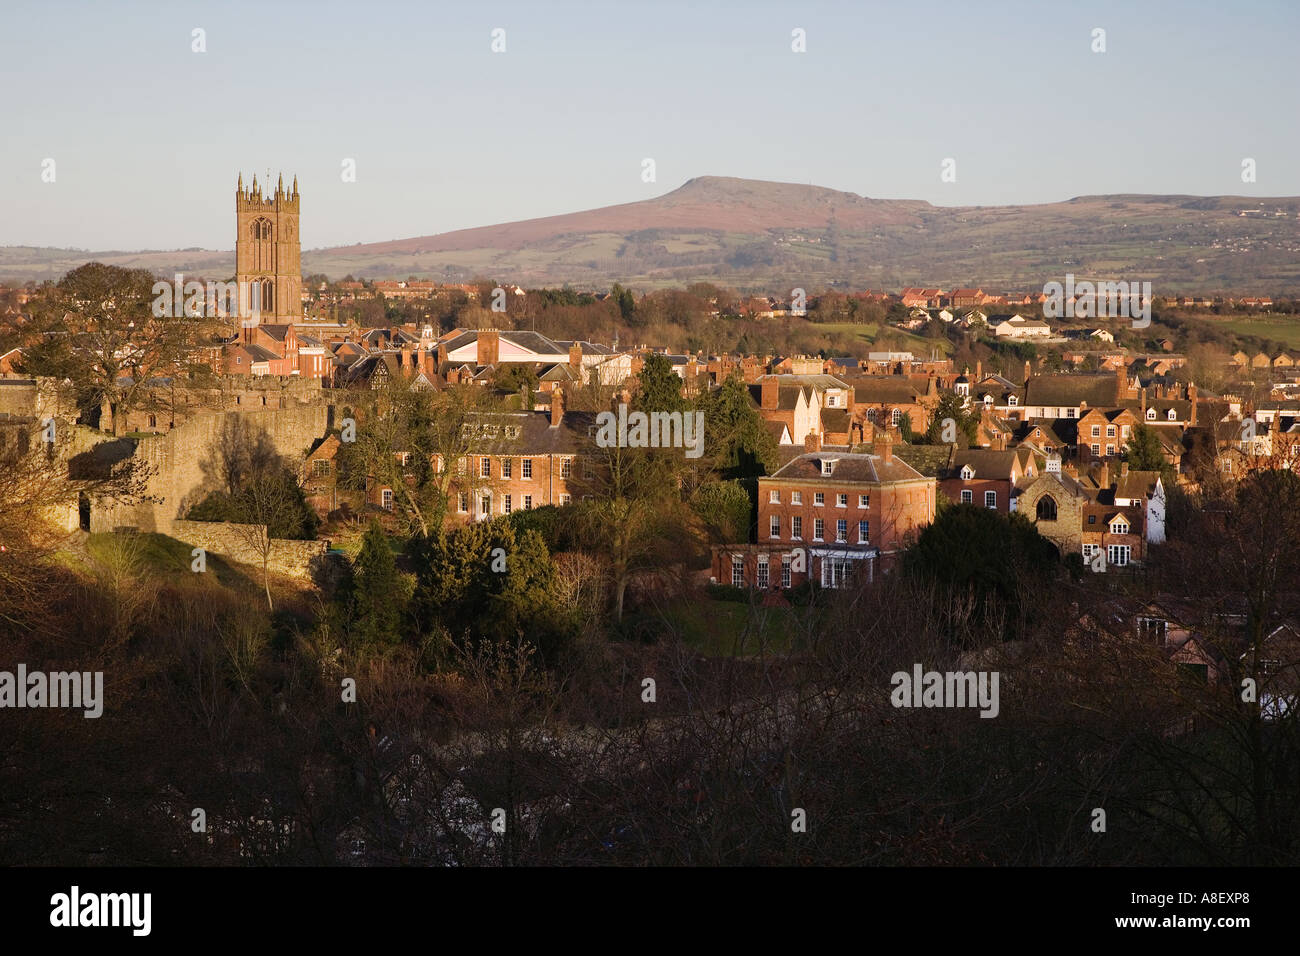 LUDLOW TOWN WITH CLEE HILL IN BACKGROUND LATE AFTERNOON LIGHT SHROPSHIRE UK Stock Photo